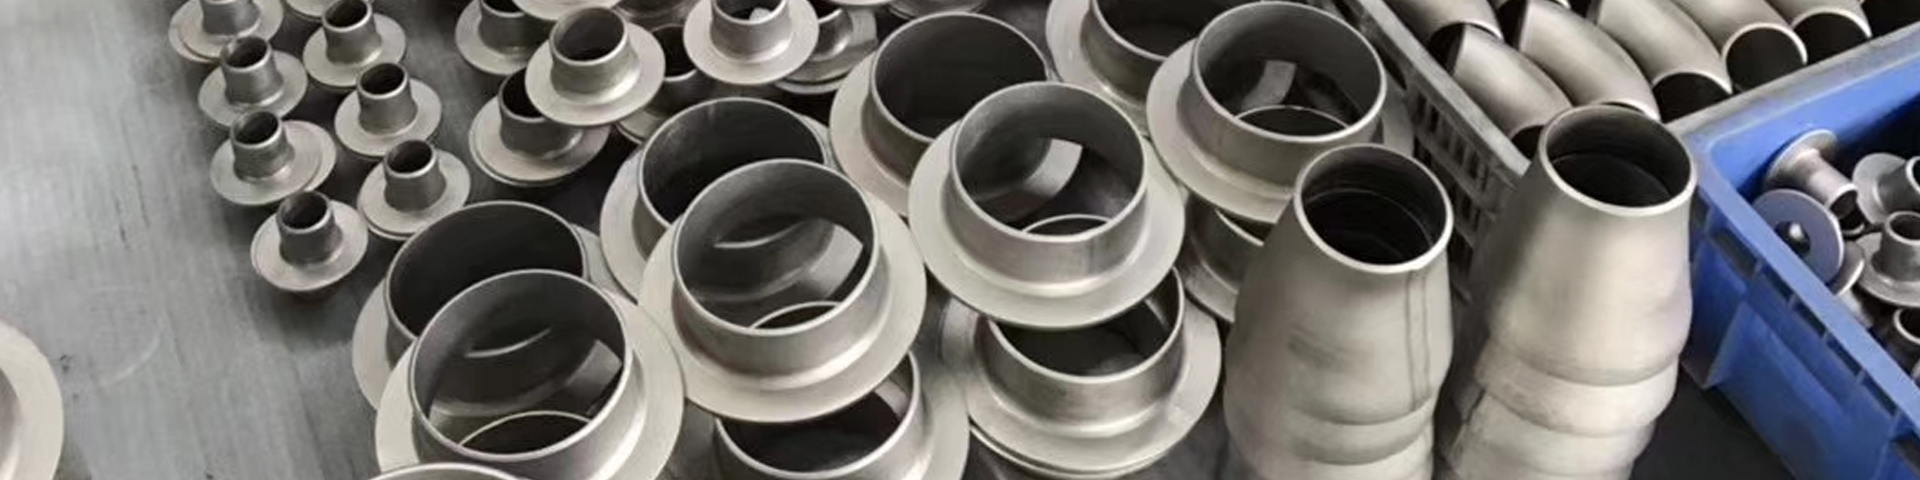 buttweld pipe fittings manufacturer